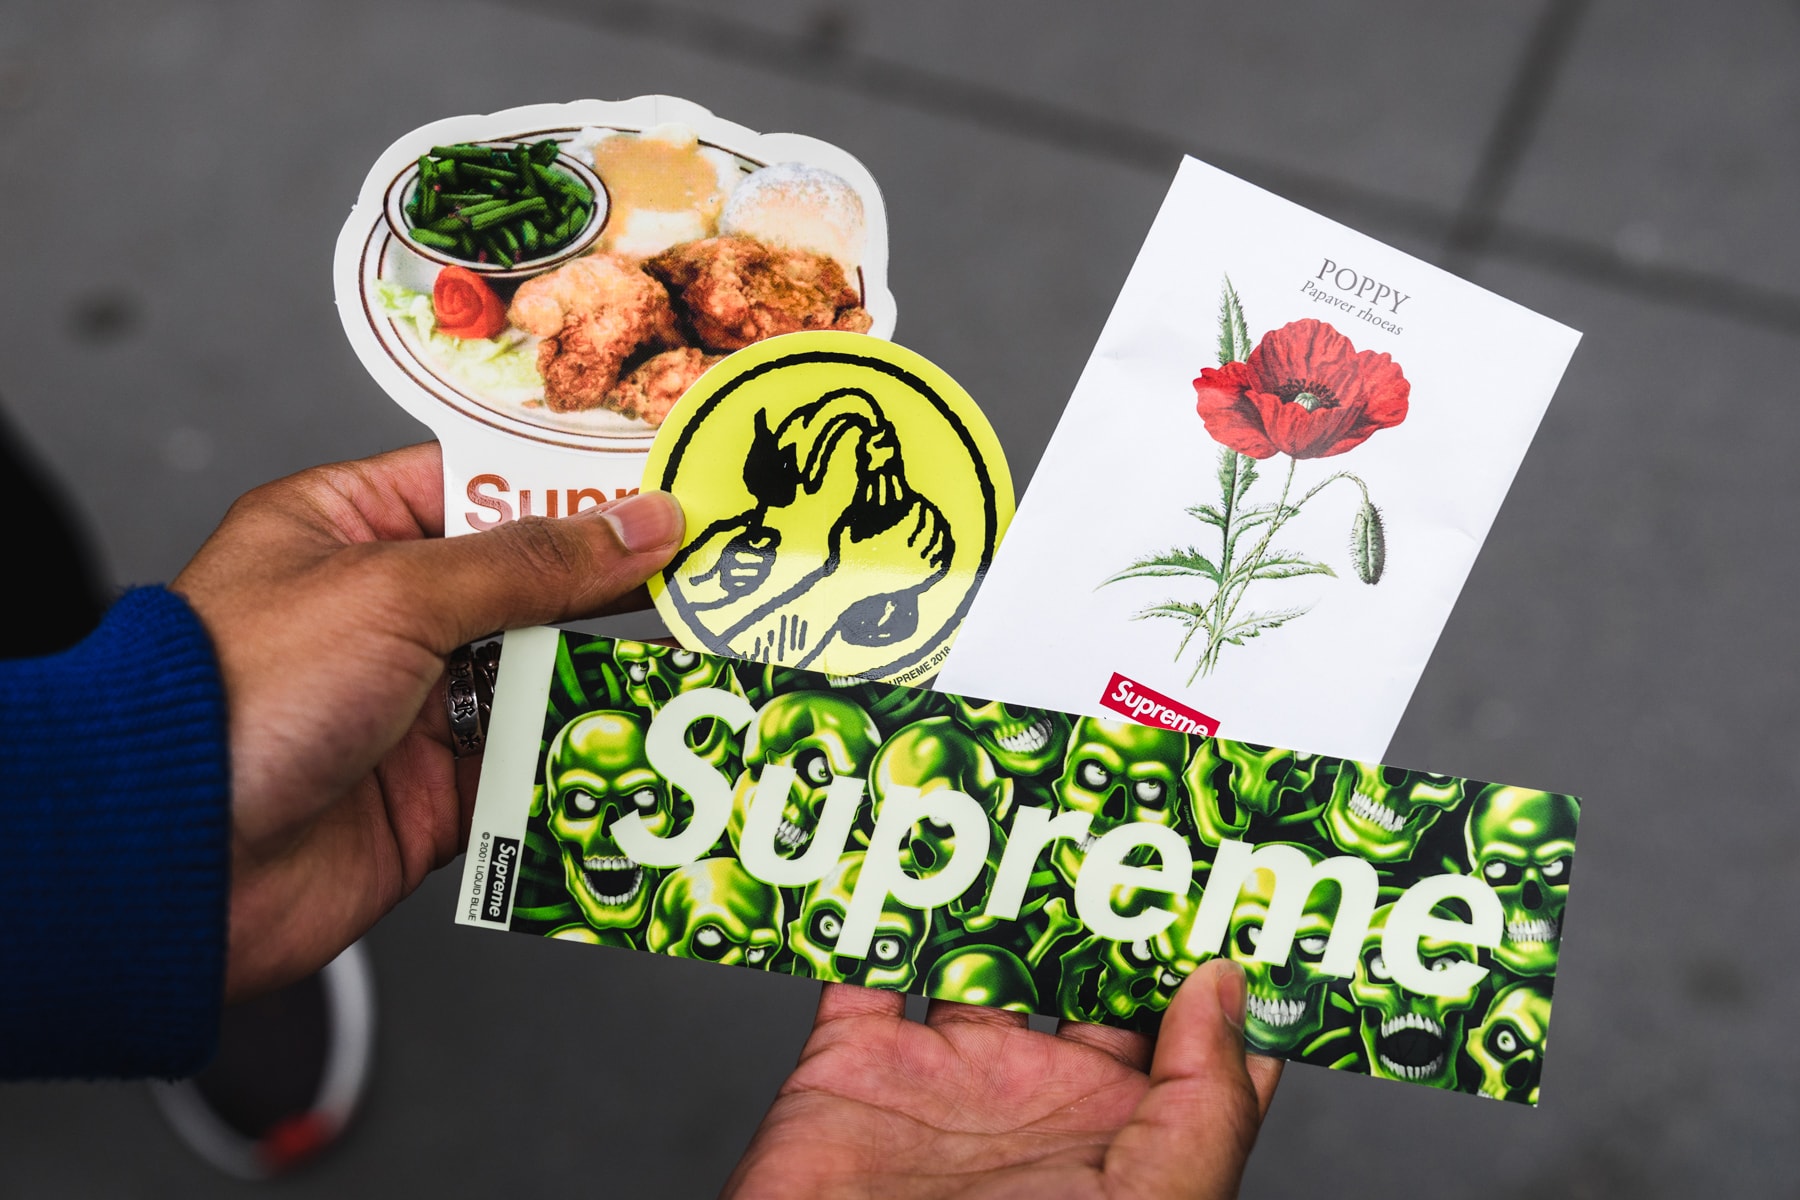 Supreme 2018 Spring/Summer 1 first drop street style snap new york brooklyn skull illegal business accessory deck